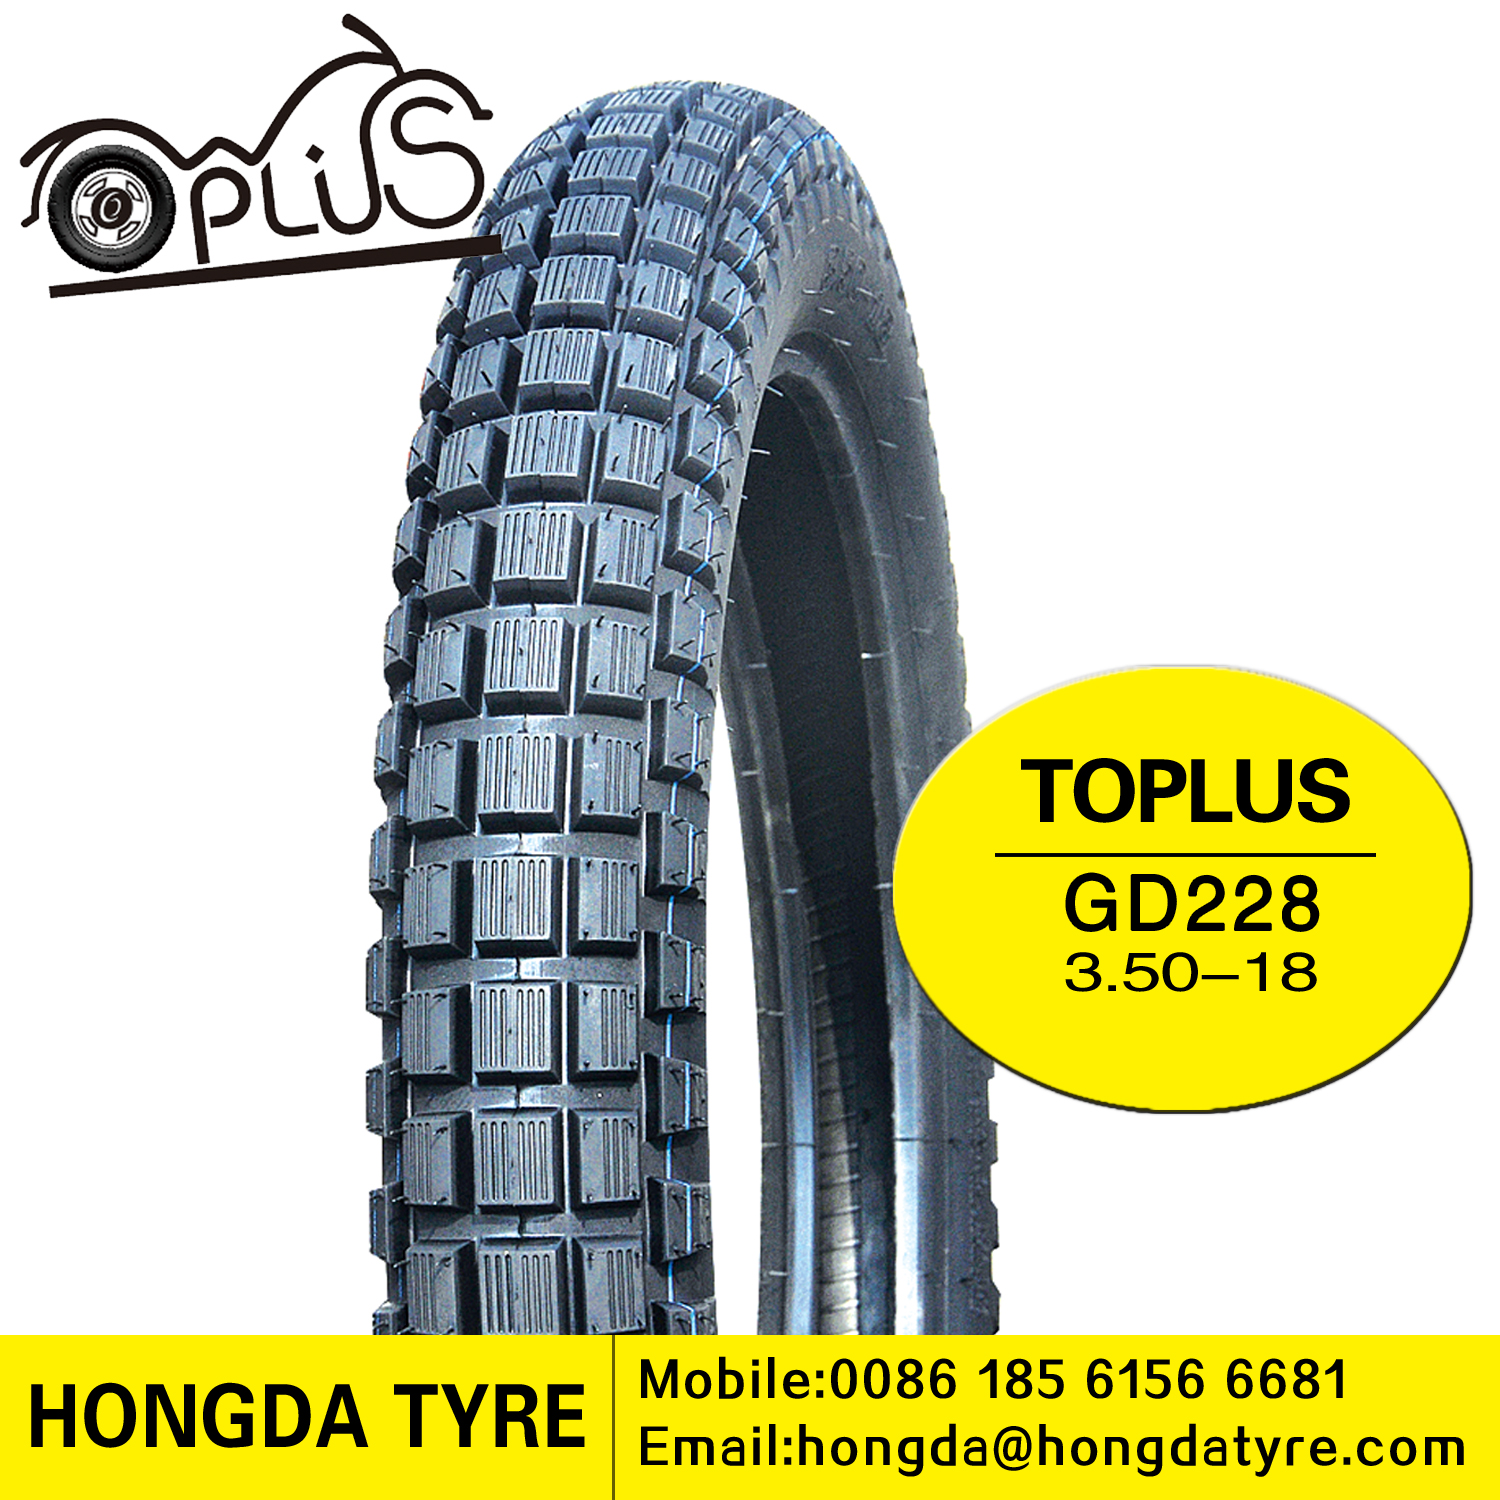 Motorcycle tyre GD228